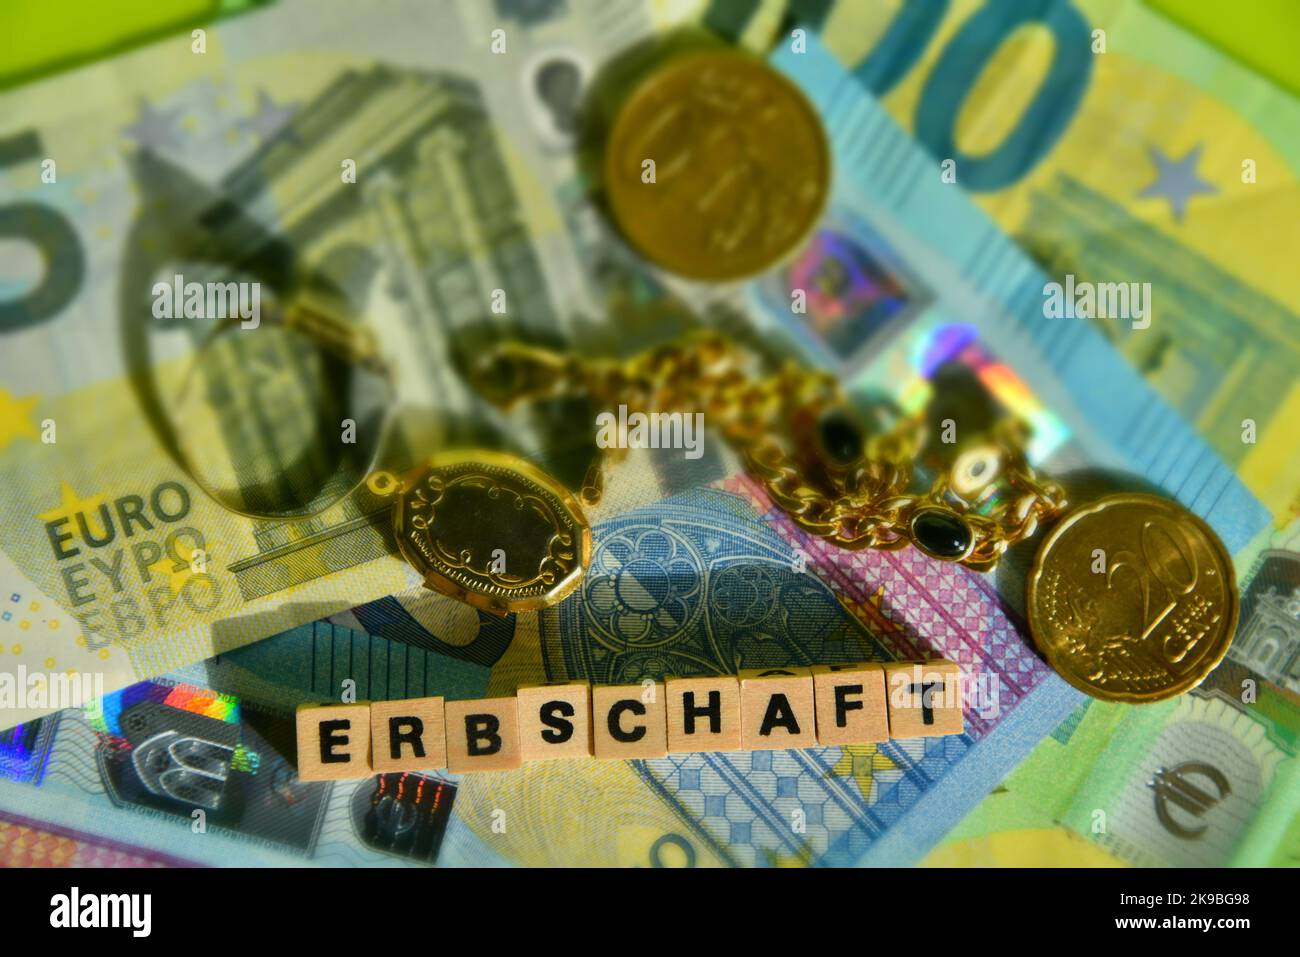 the german word for heritage and euro bank notes Stock Photo